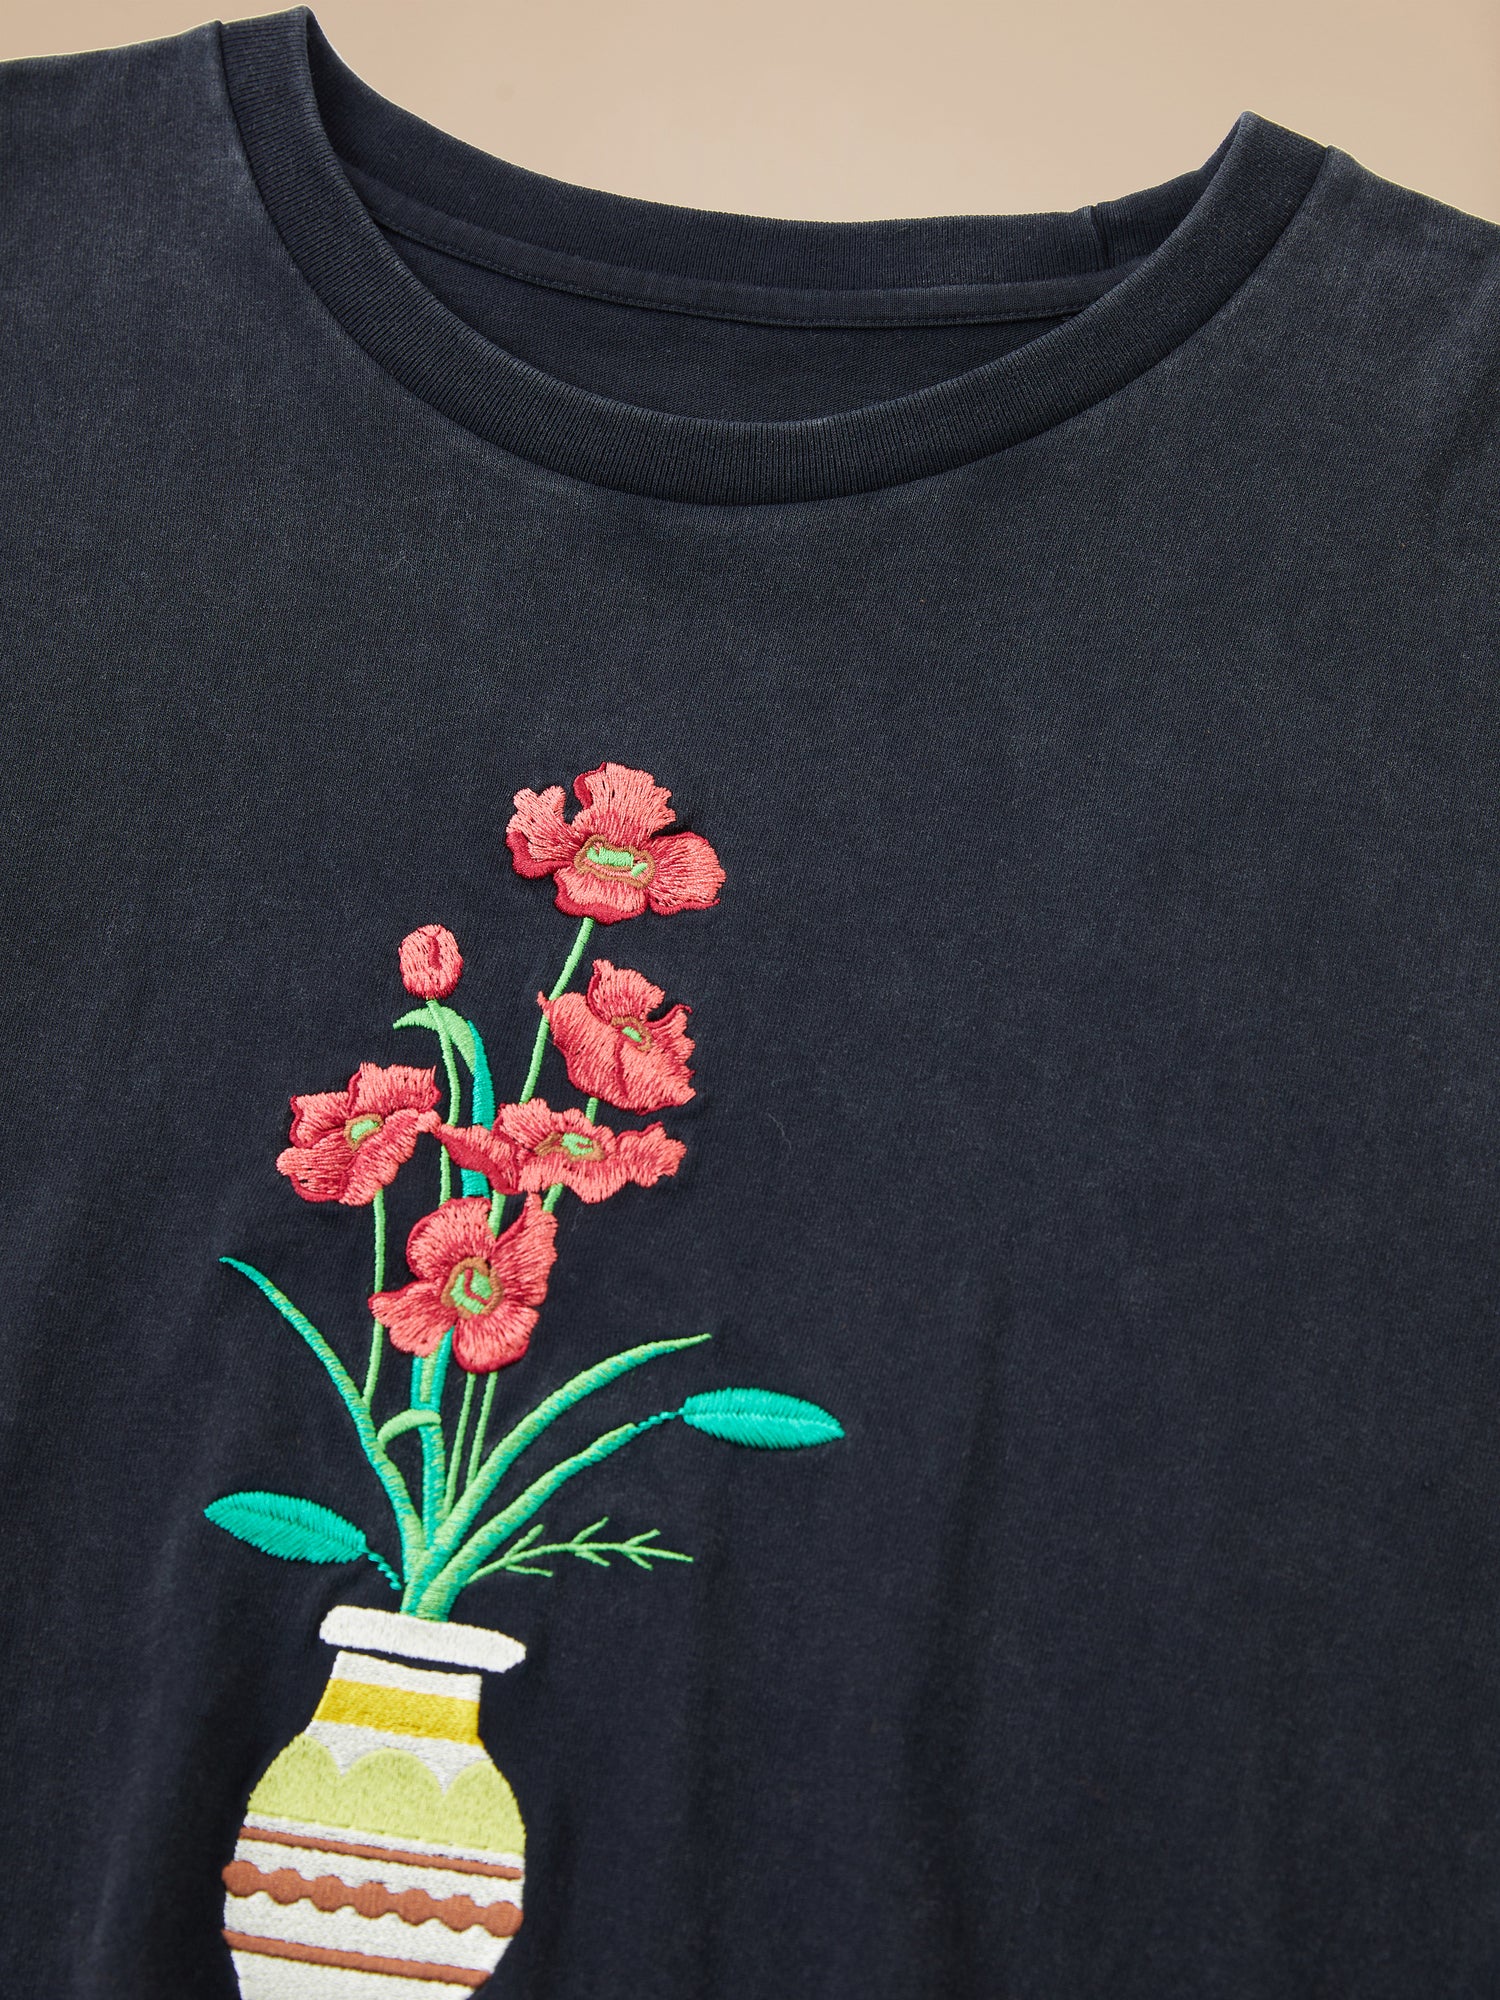 A Flowers Vase Tee, adorned with embroidered flowers from Found.